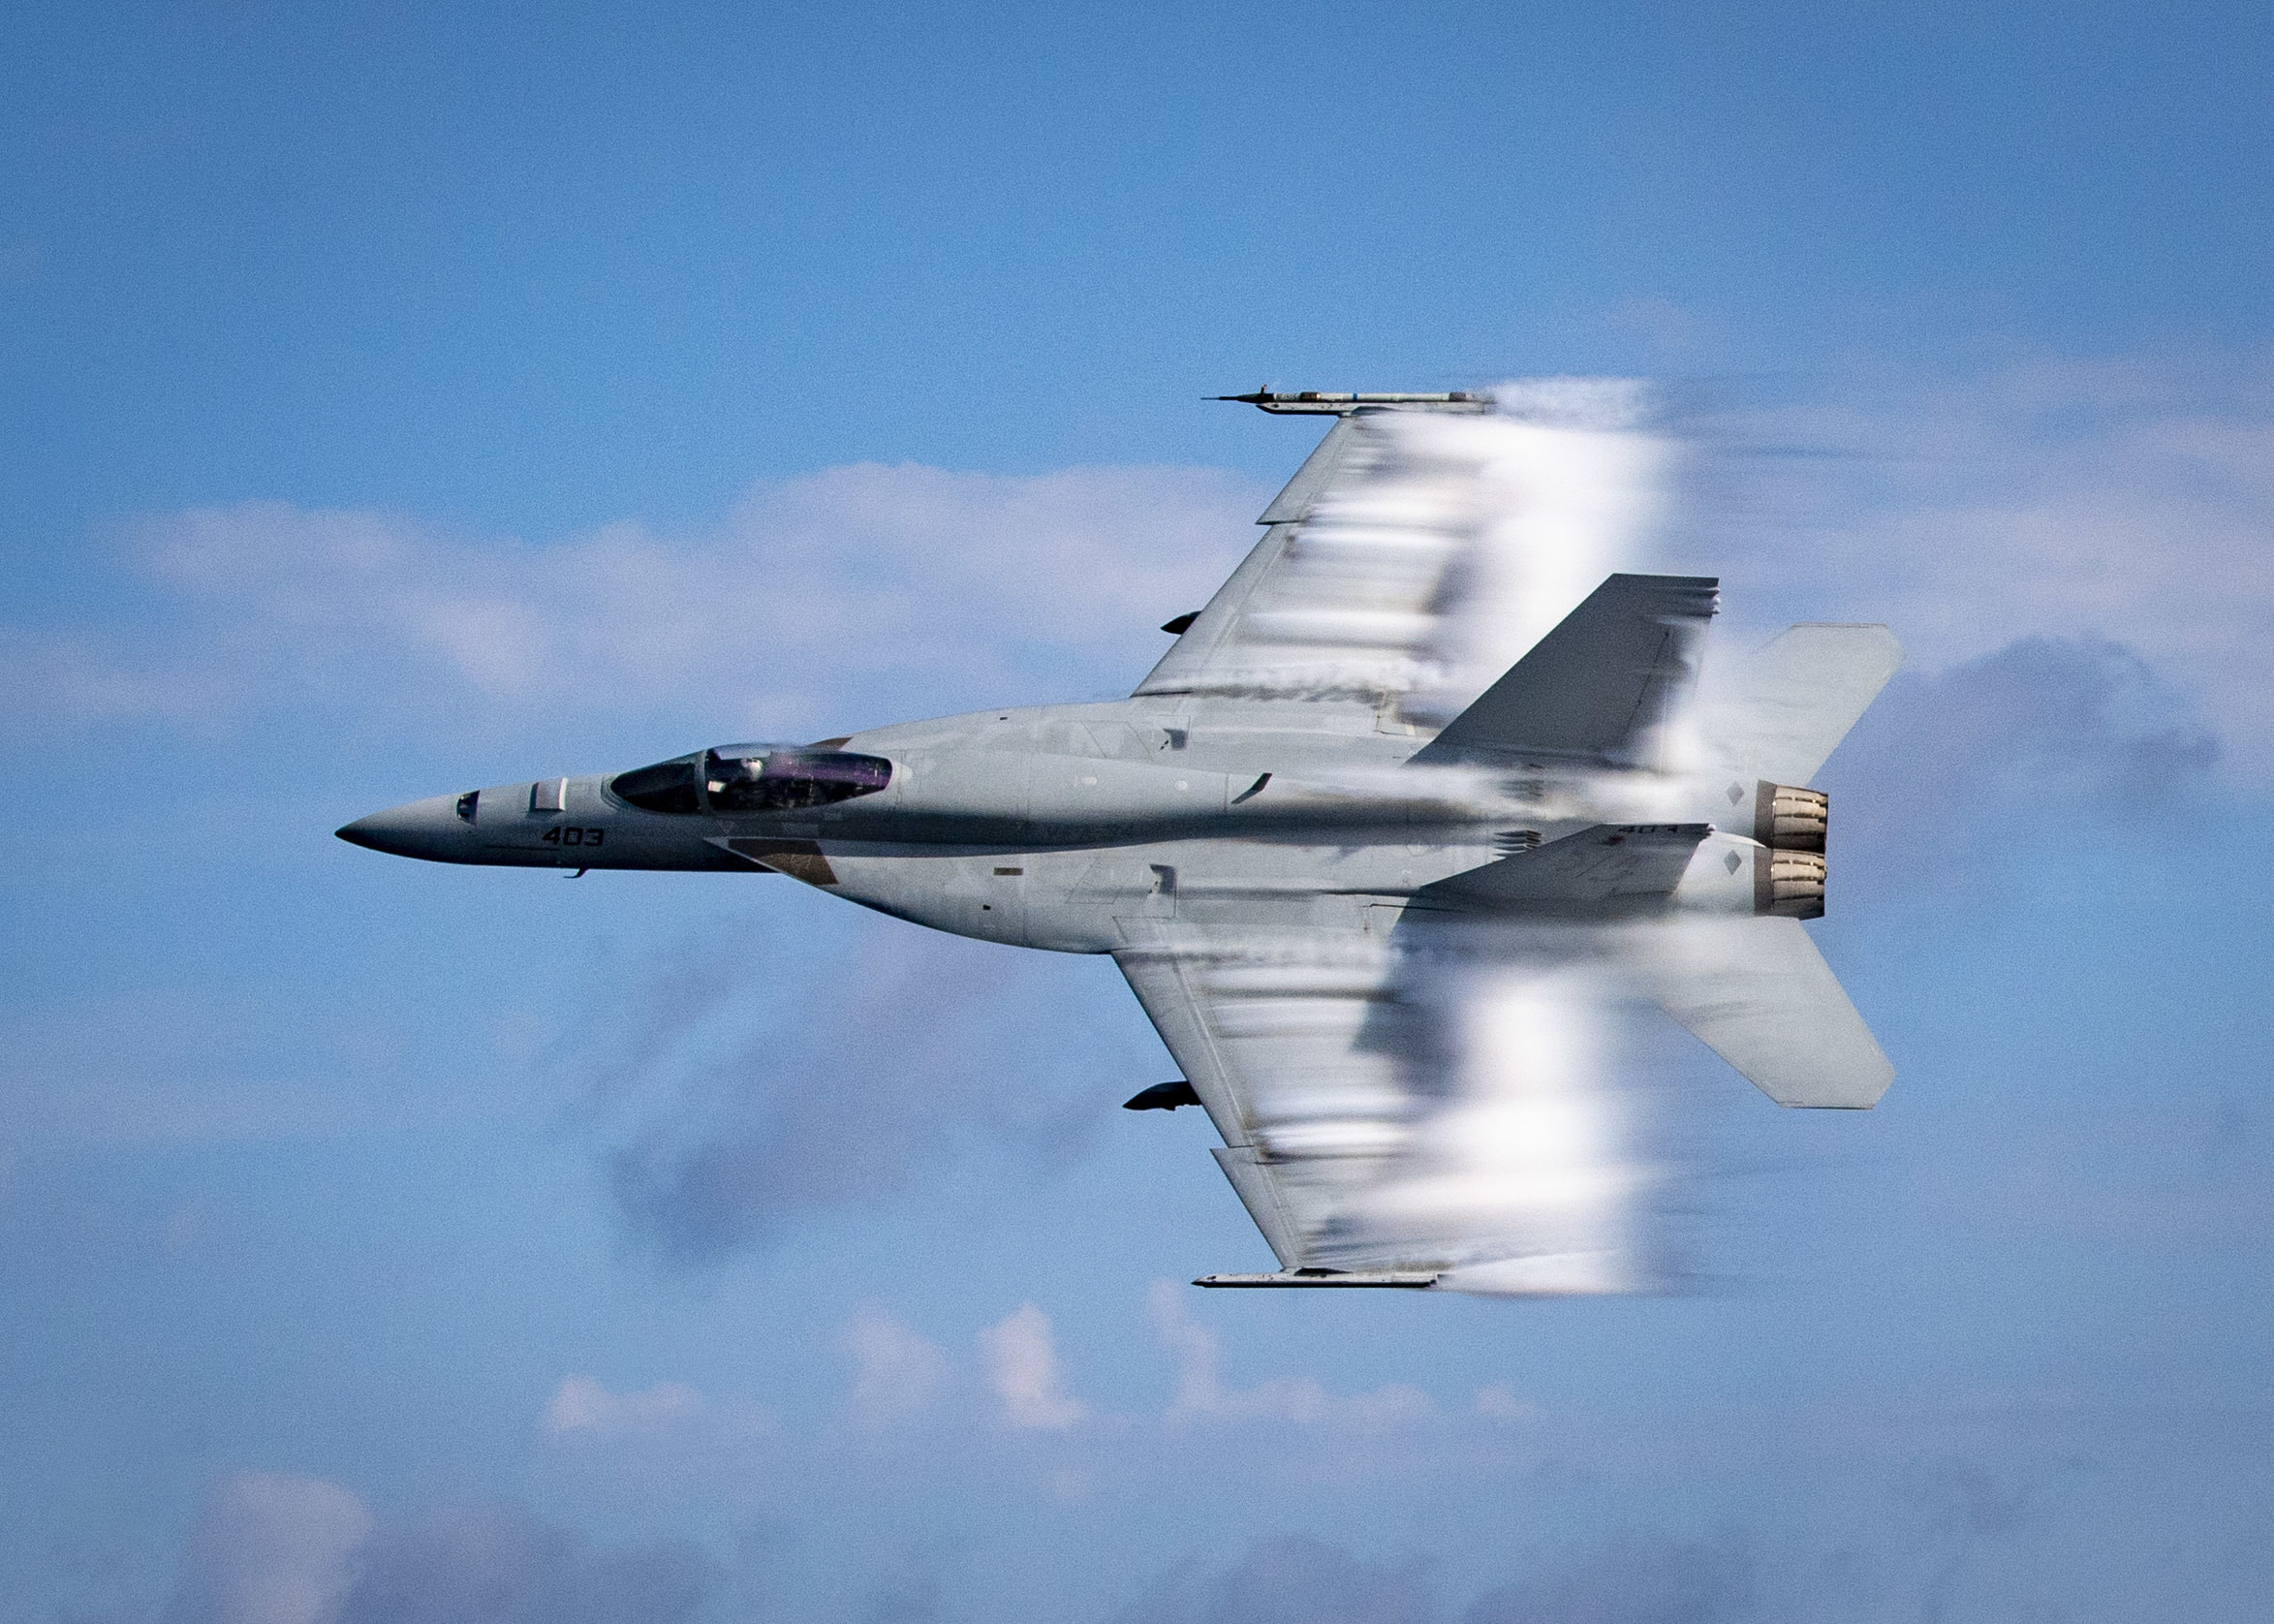 U.S. Navy Lt. Cmdr. Benjamin Orloff, assigned to the "Blue Blasters" of Strike Fighter Squadron 34, conducts a supersonic pass in an F/A-18E Super Hornet next to the guided-missile destroyer USS Gridley (DDG 101) during a training exercise in the Atlantic Ocean, Aug. 23, 2019. Gridley is underway on a regularly-scheduled deployment as the flagship of Standing NATO Maritime Group 1 to conduct maritime operations and provide a continuous maritime capability for NATO in the northern Atlantic. (U.S. Navy photo by Mass Communication Specialist 2nd Class Cameron Stoner)